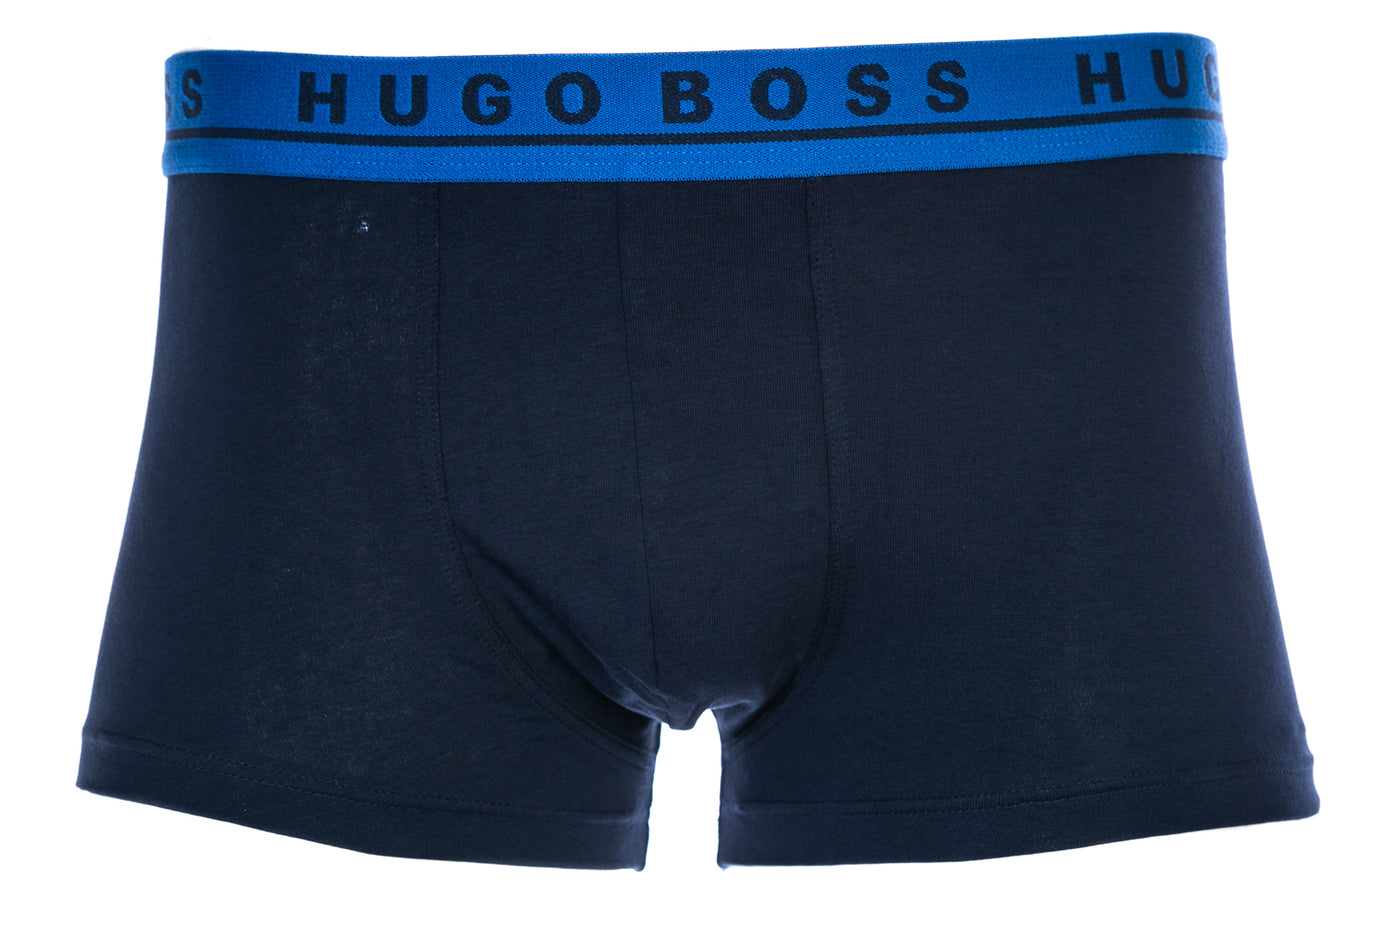 BOSS 3 Pack Trunk Underwear in Navy with Contrast Waistands